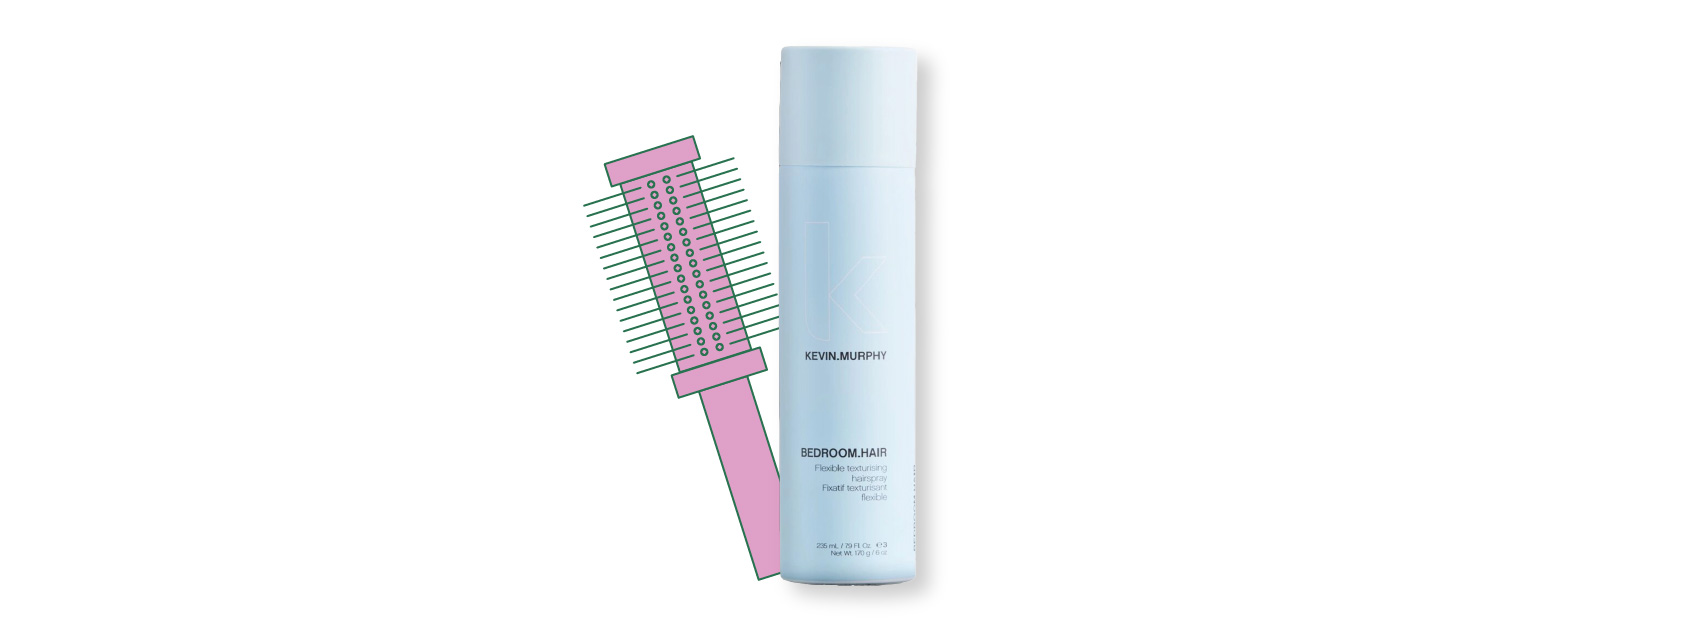 bottle of bedroom hair by kevin murphy with an illustration of a hairbrush